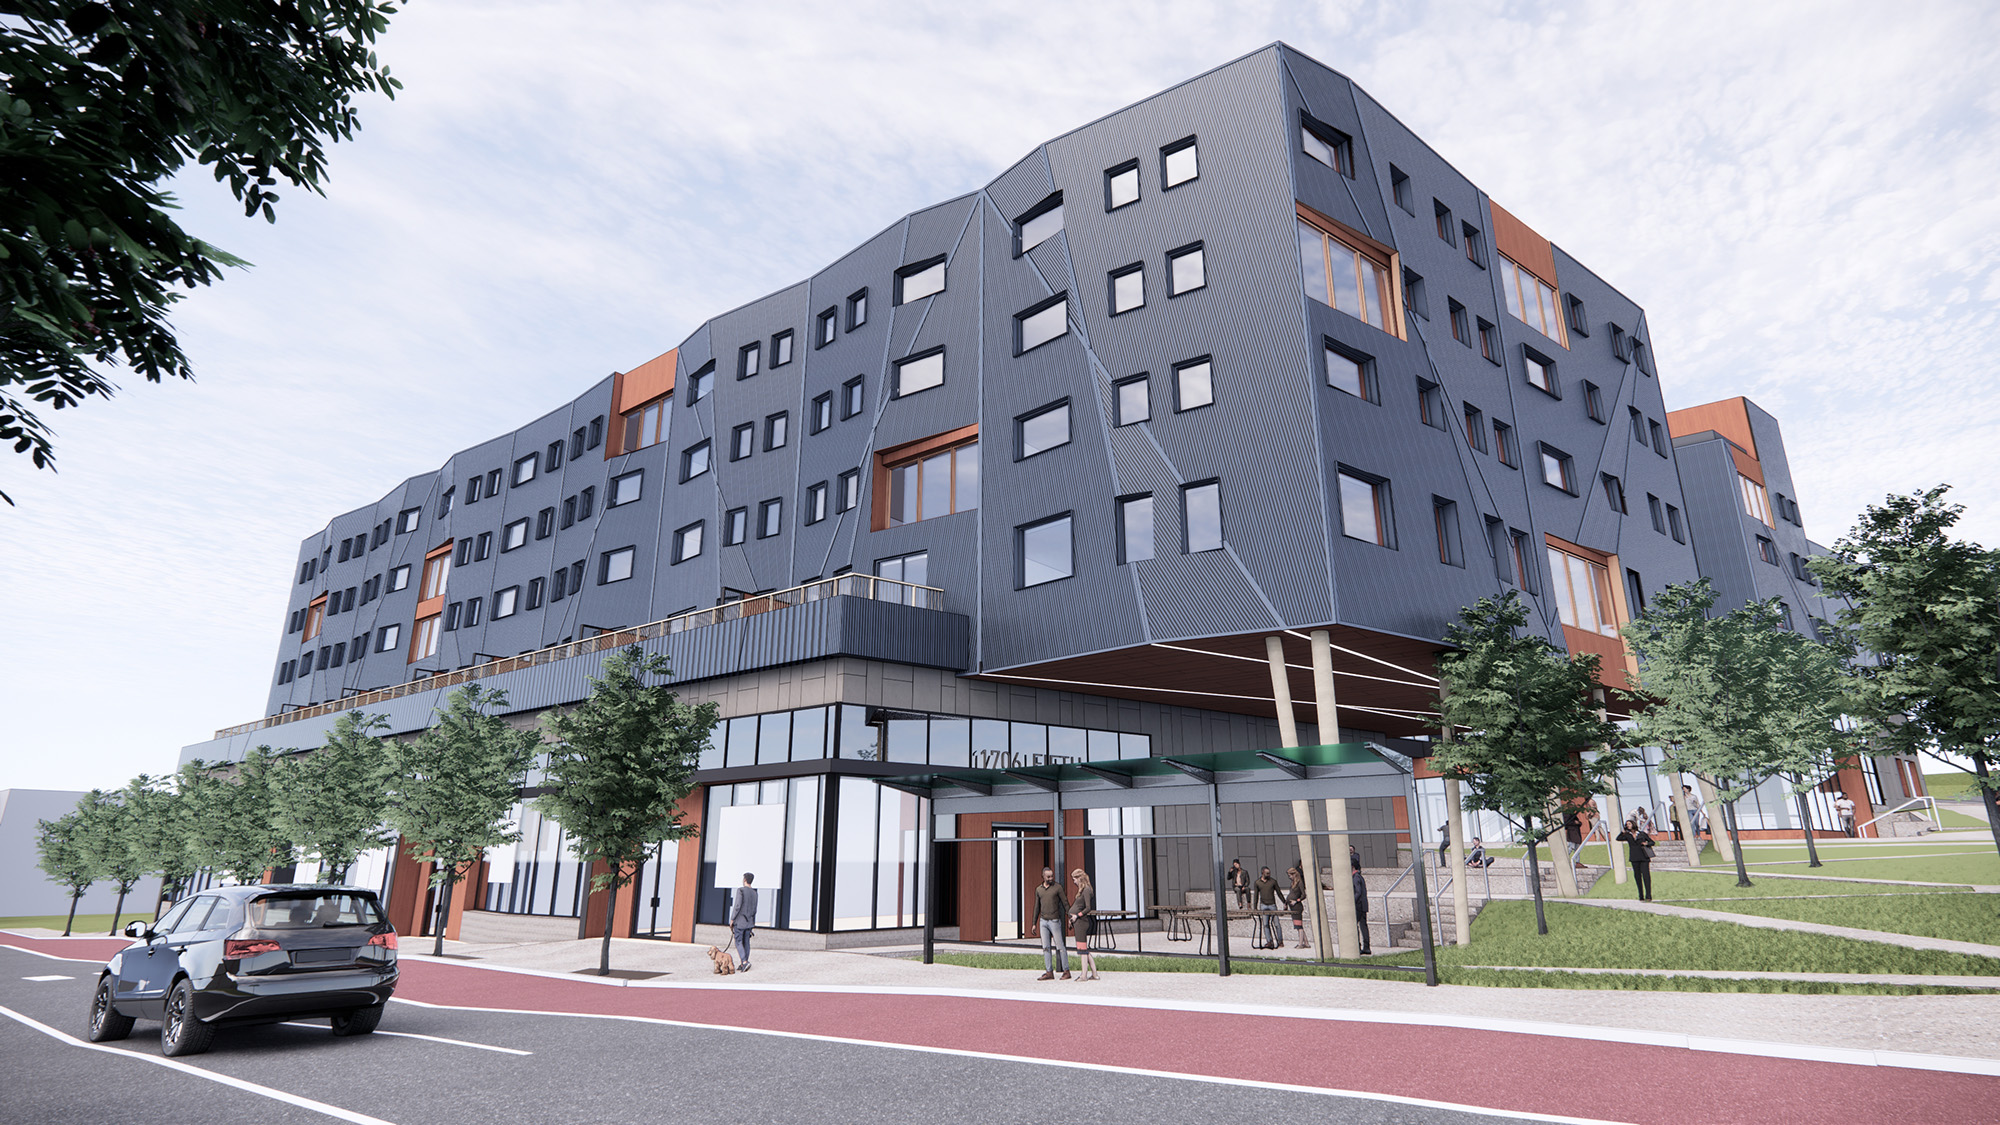  Fifth & Dinwiddie West in Pittsburgh, Pa., affordable housing community